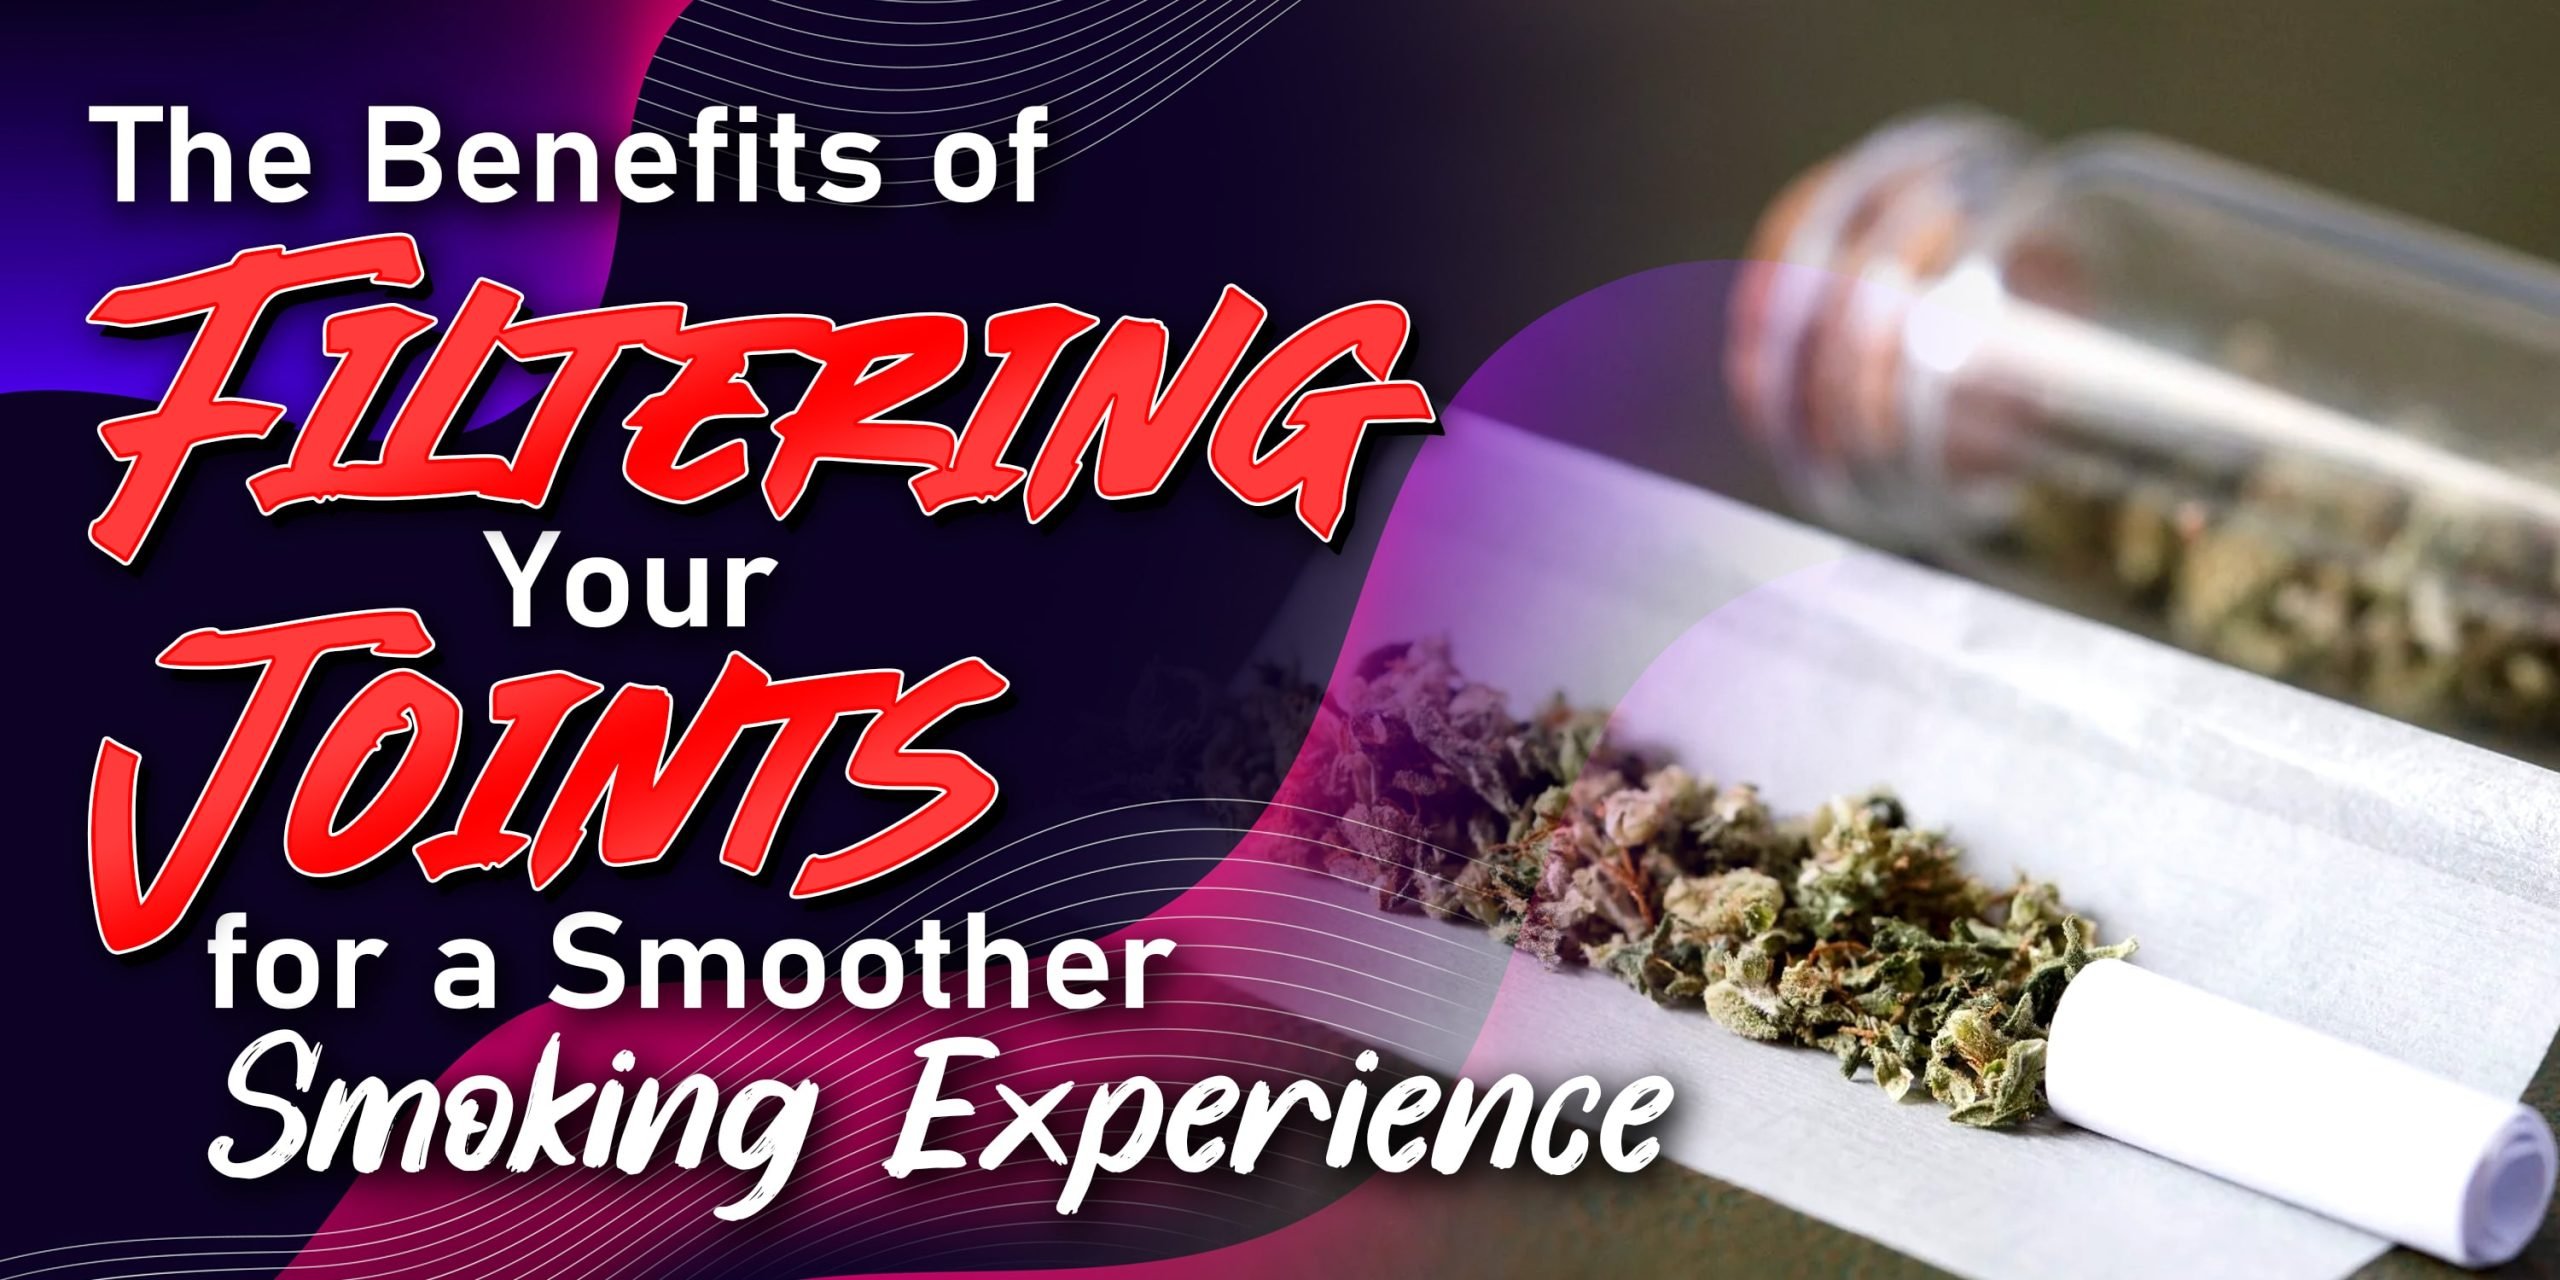 The Benefits Of Filtering Your Joints For A Smoother Smoking Experience Min Scaled, Crop King Seeds